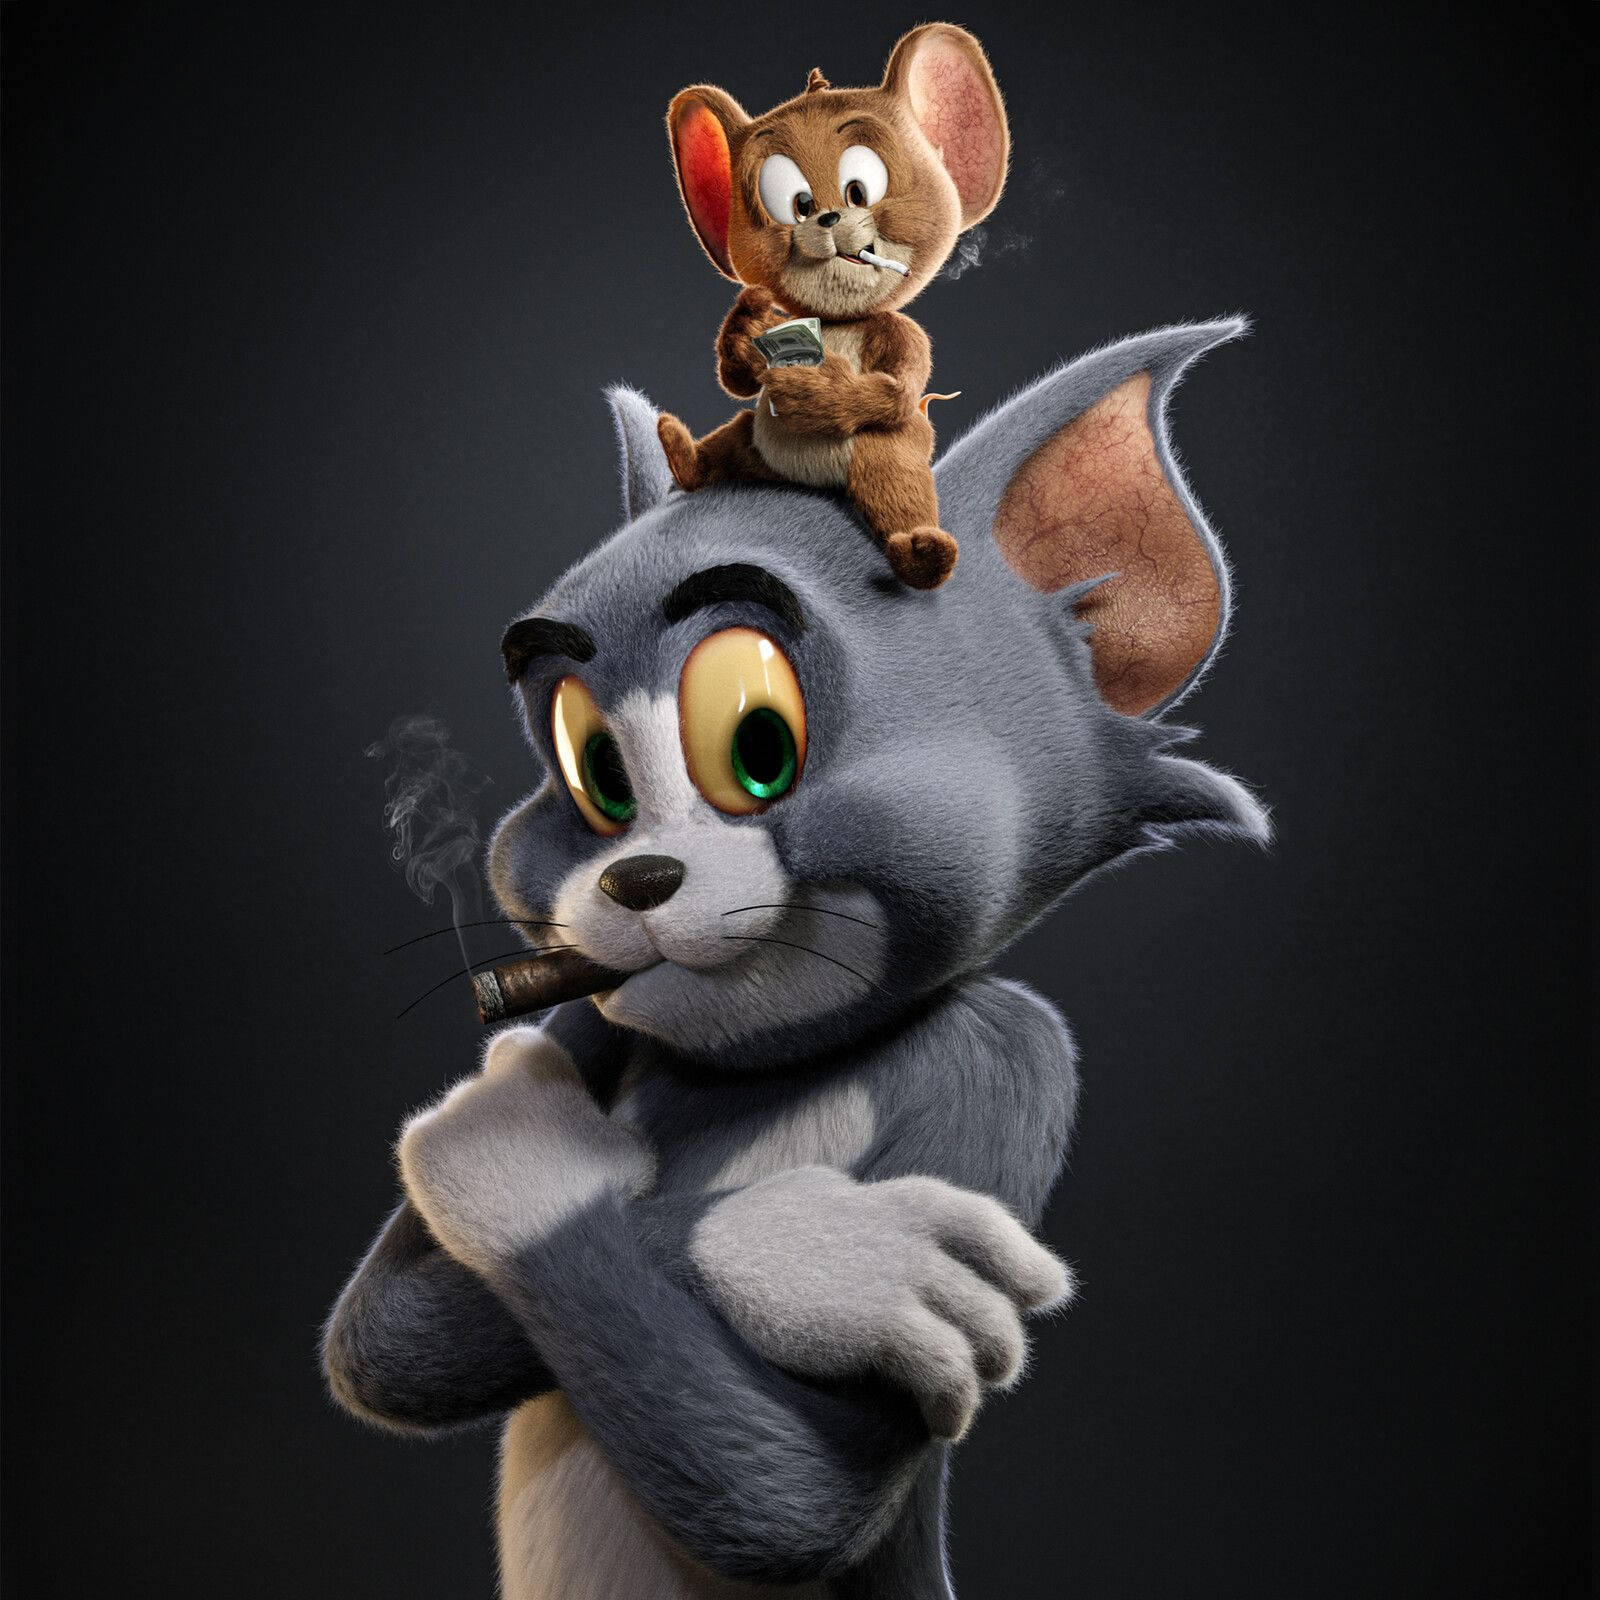 Tom And Jerry 4k wallpaper for desktop and mobile phone